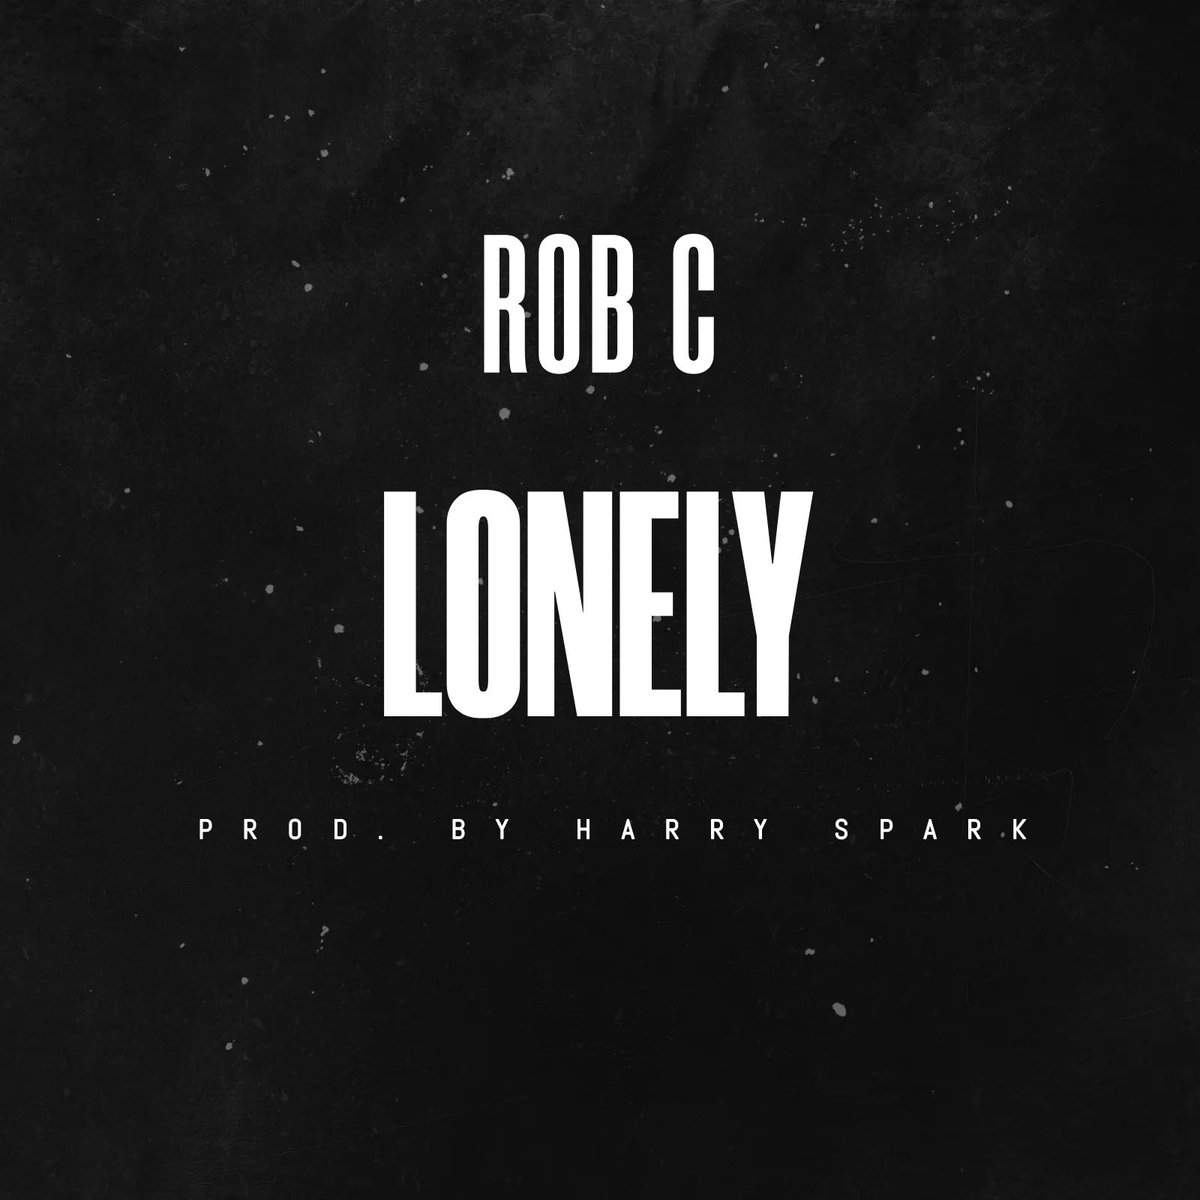 Dedicated to the ones going through some tough times in their lives. Dropping soon! @hrrysprk on the beat.

#robc #lonely #harryspark #hiphop #hindirap